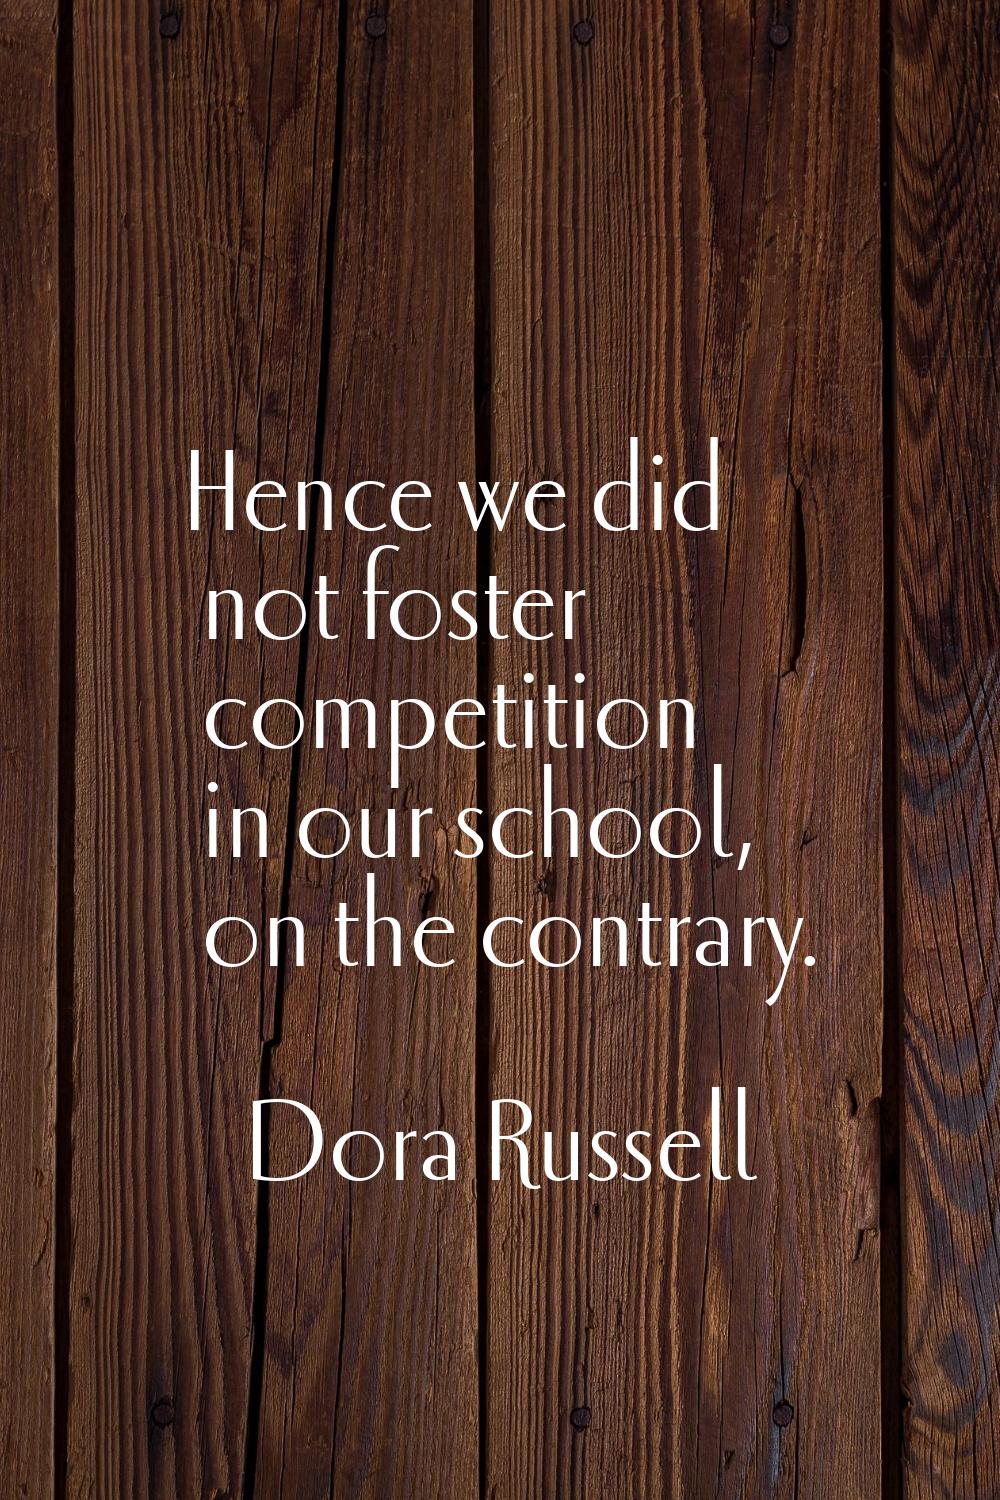 Hence we did not foster competition in our school, on the contrary.